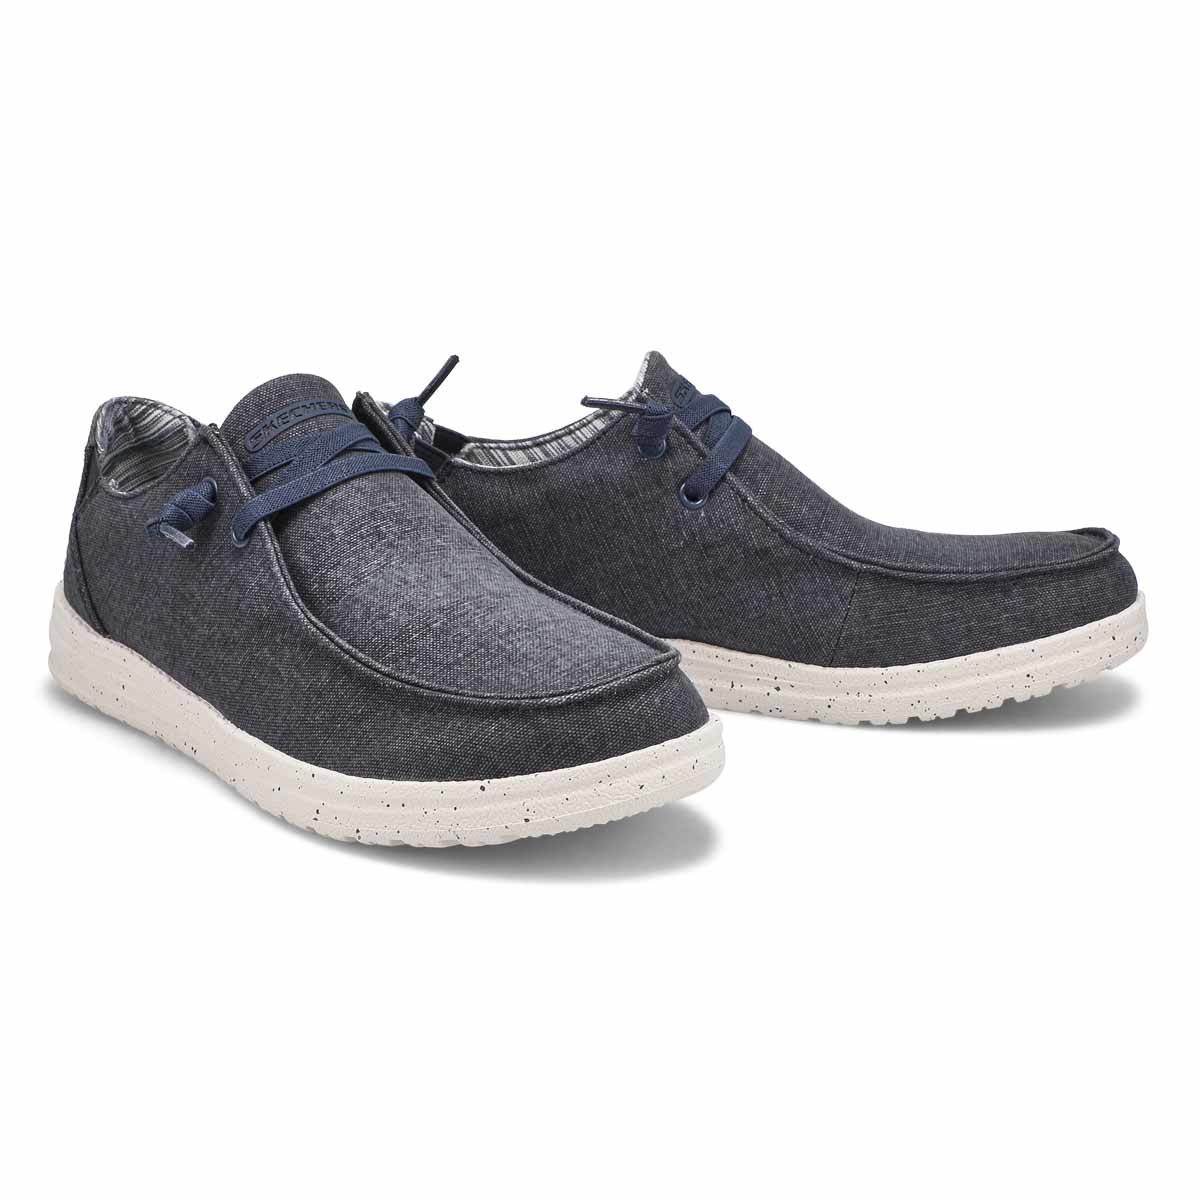 Men's Melson Chad Slip On Shoe - Navy